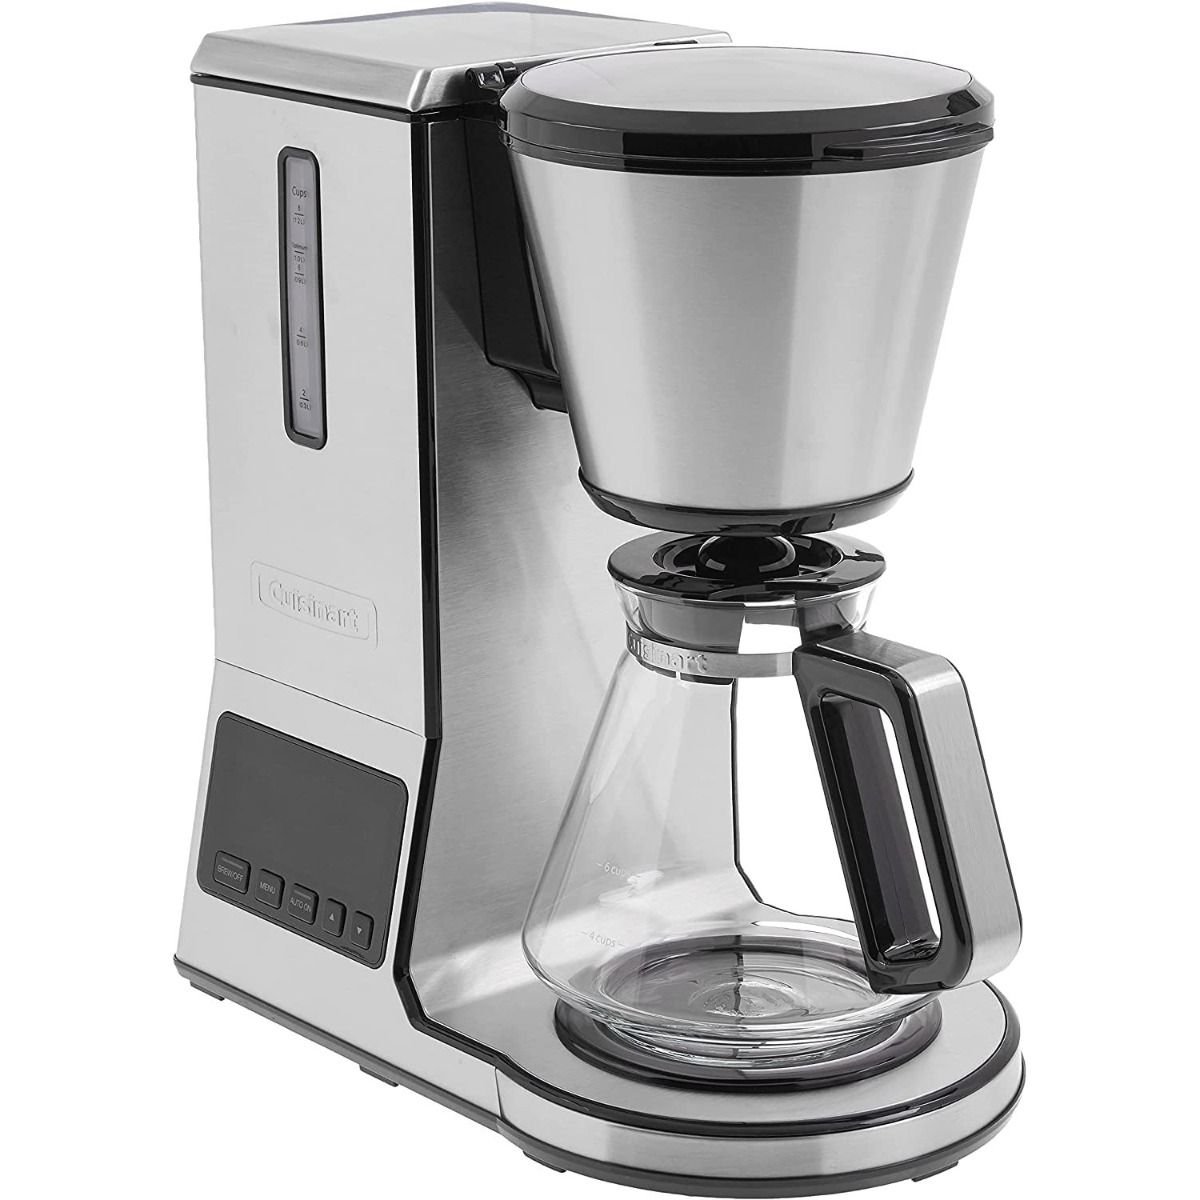 8-Cup Coffee Maker